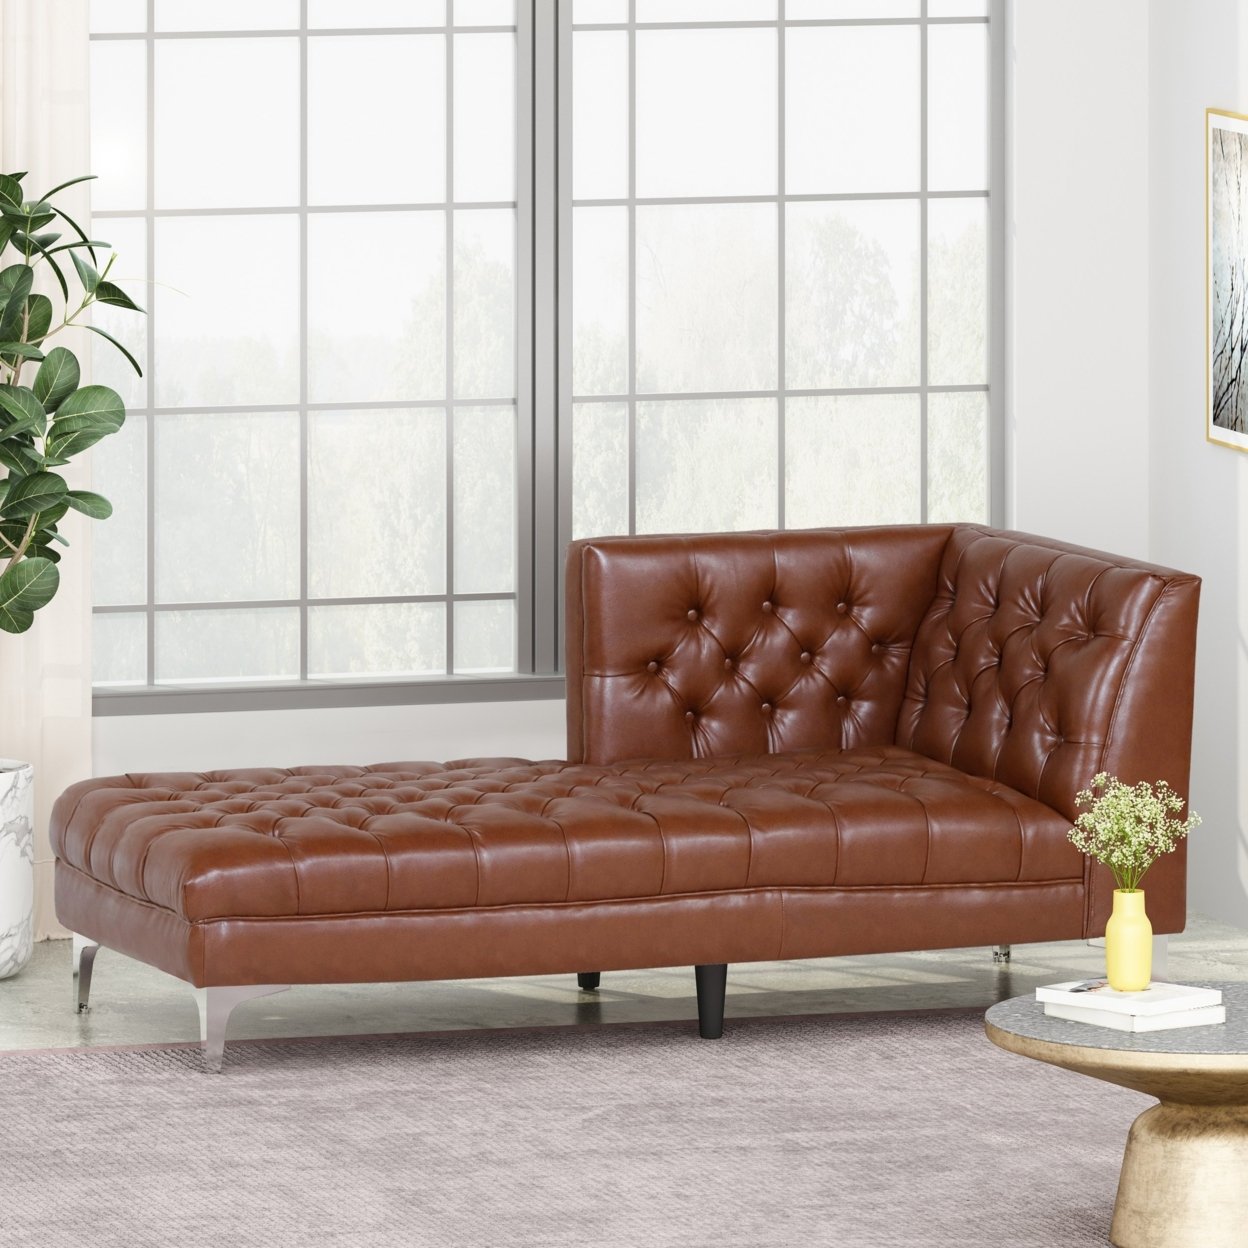 Bluffton Contemporary Tufted One Armed Chaise Lounge - Silver/cognac